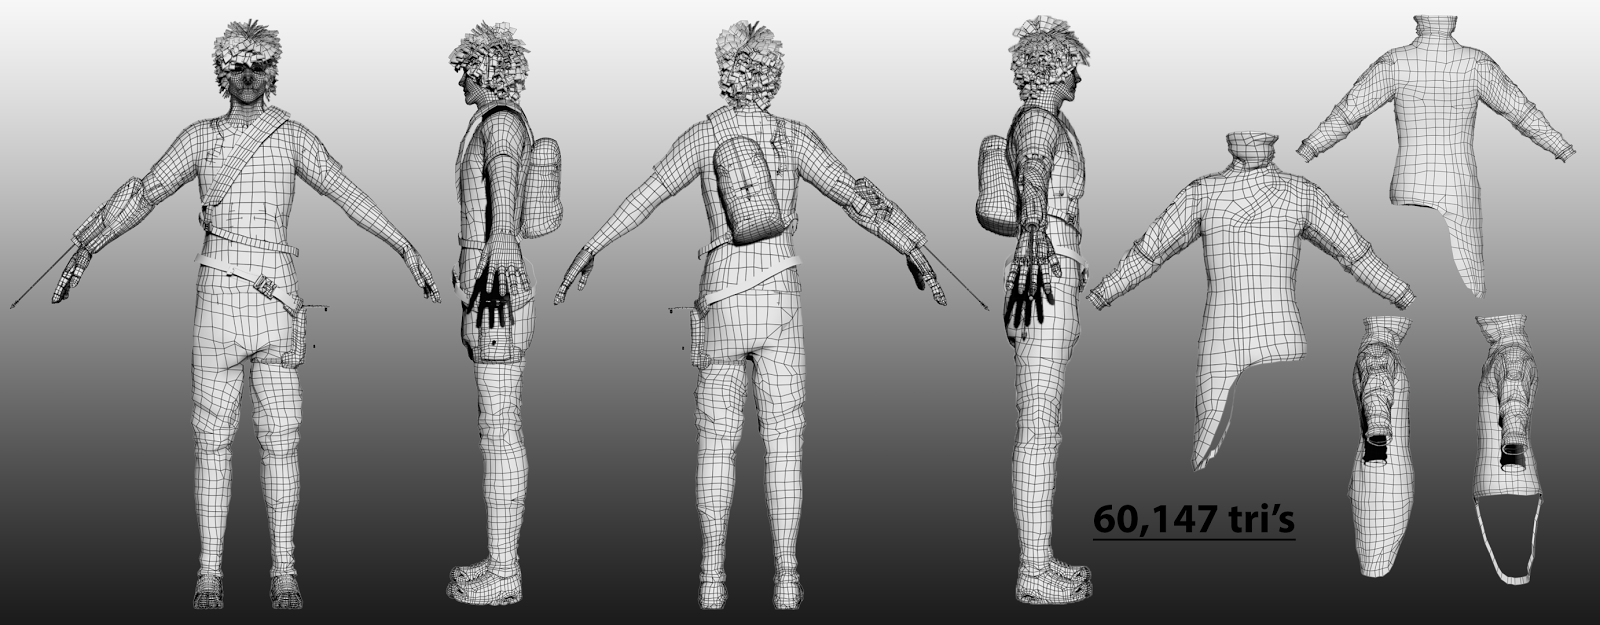 aiden+wireframe+2.png